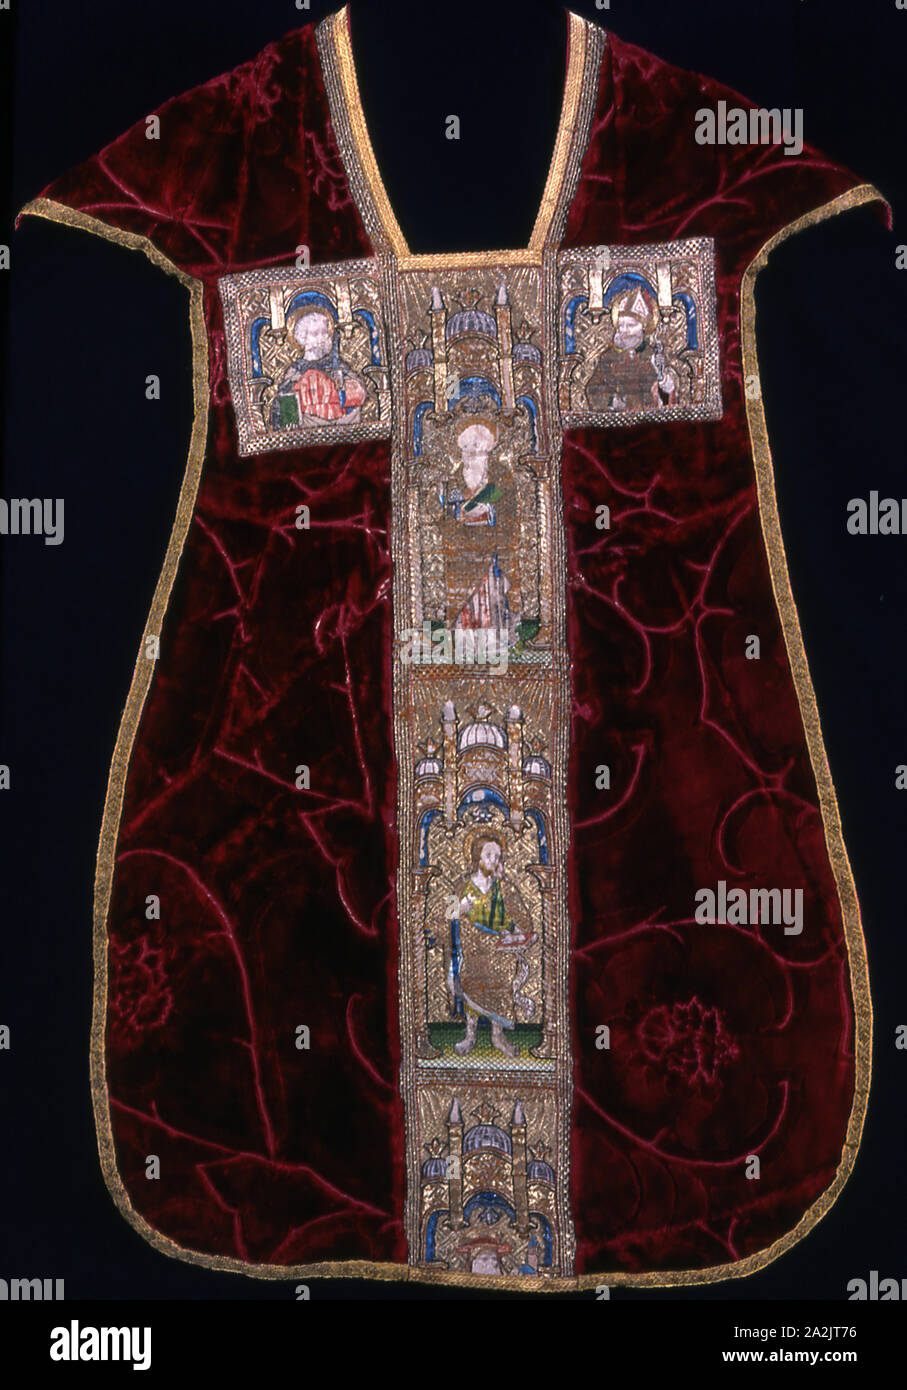 Chasuble, 1425/75, Italy, Silk, warp-float faced satin weave with supplementary pile warps forming cut voided pile-on-pile velvet, orphrey: linen, plain weave, embroidered with silk and gilt-metal-strip-wrapped silk in satin, padded satin, and split stitches, couching, padded couching, and laid work, edged with silk, gilt-metal strip, and gilt-metal-strip-wrapped silk woven tape, 111.2 x 76.8 cm (43 3/4 x 30 1/4 in Stock Photo